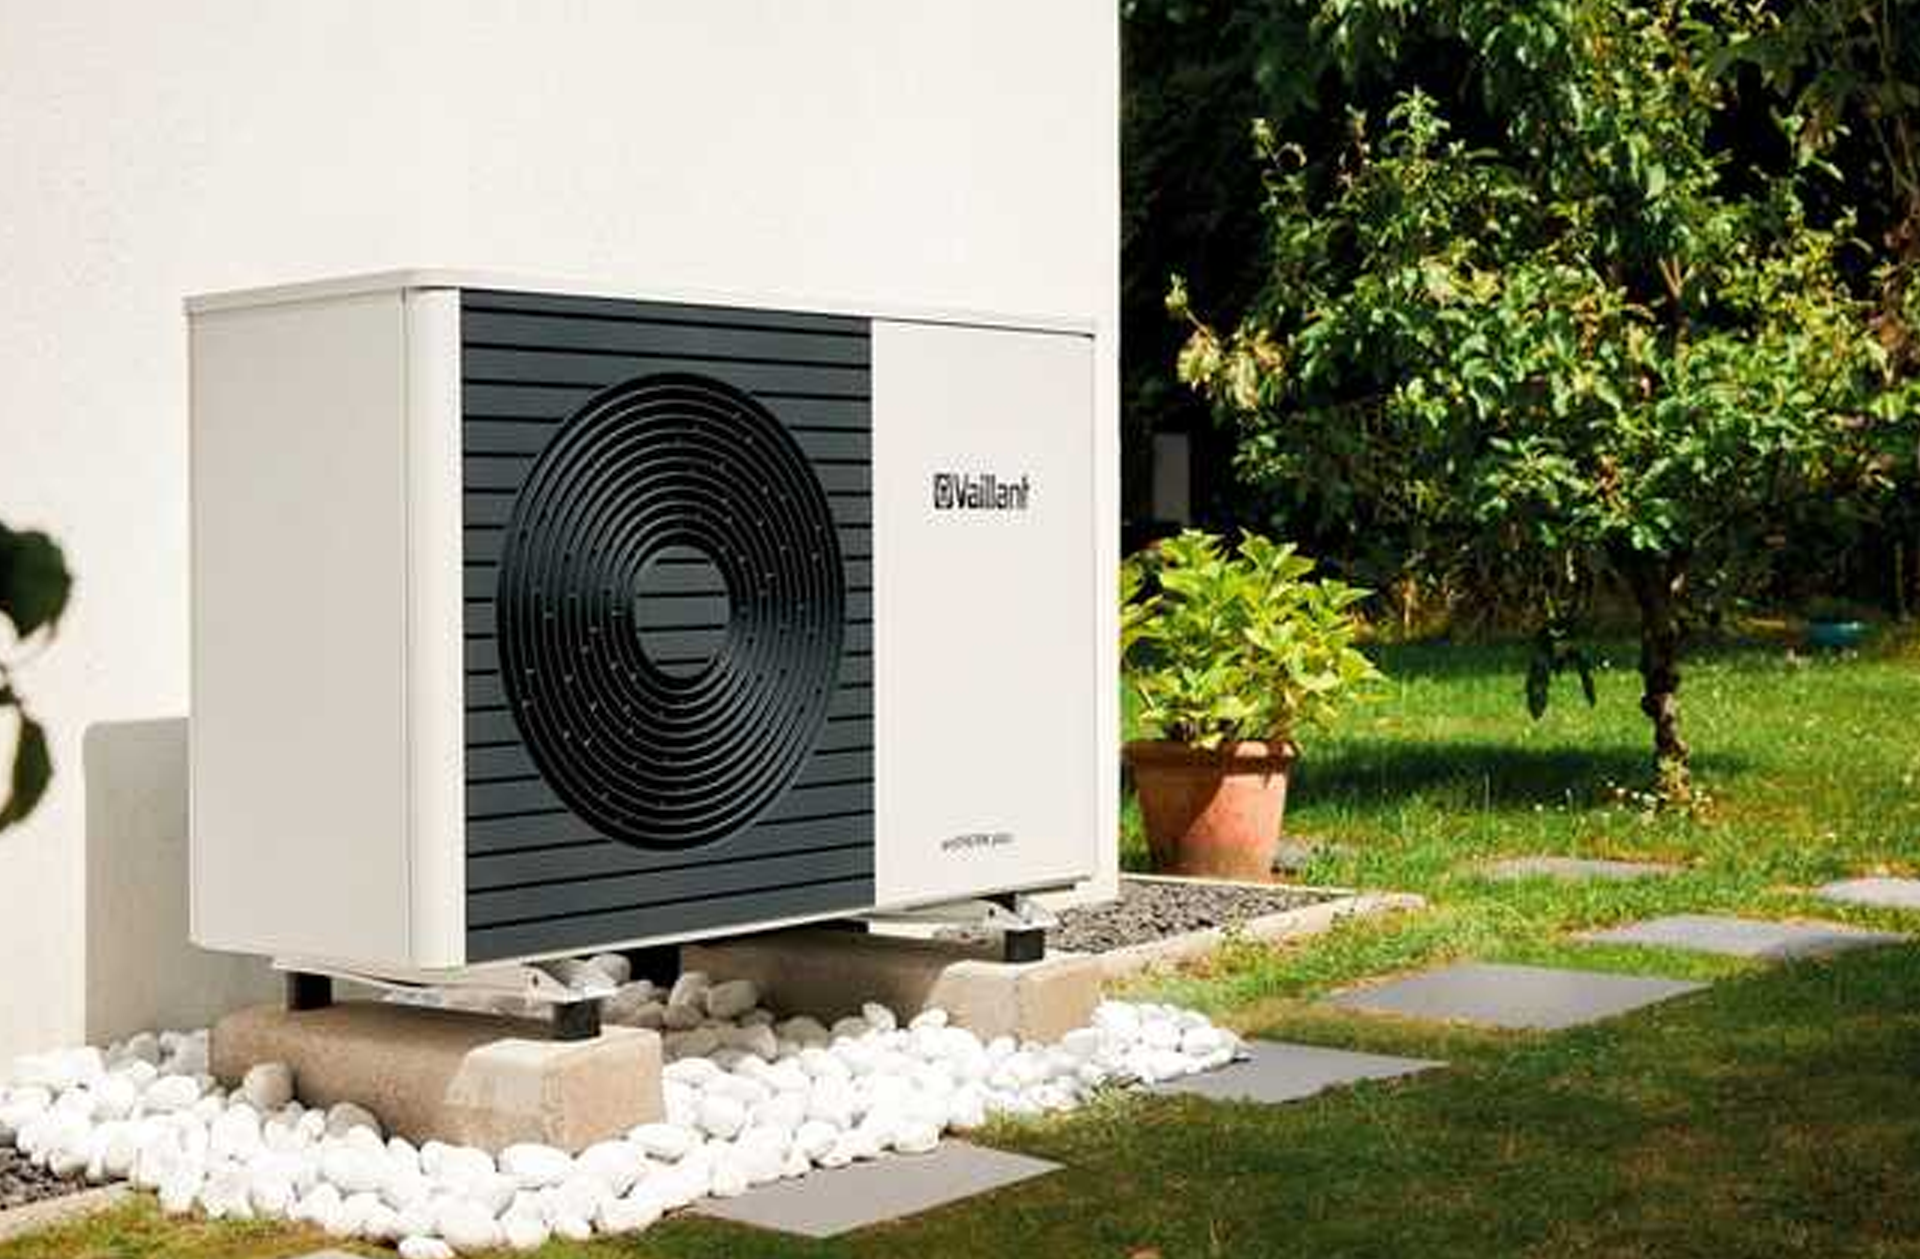 Vaillant and Hiber offer first FCA accredited finance options for heat pumps